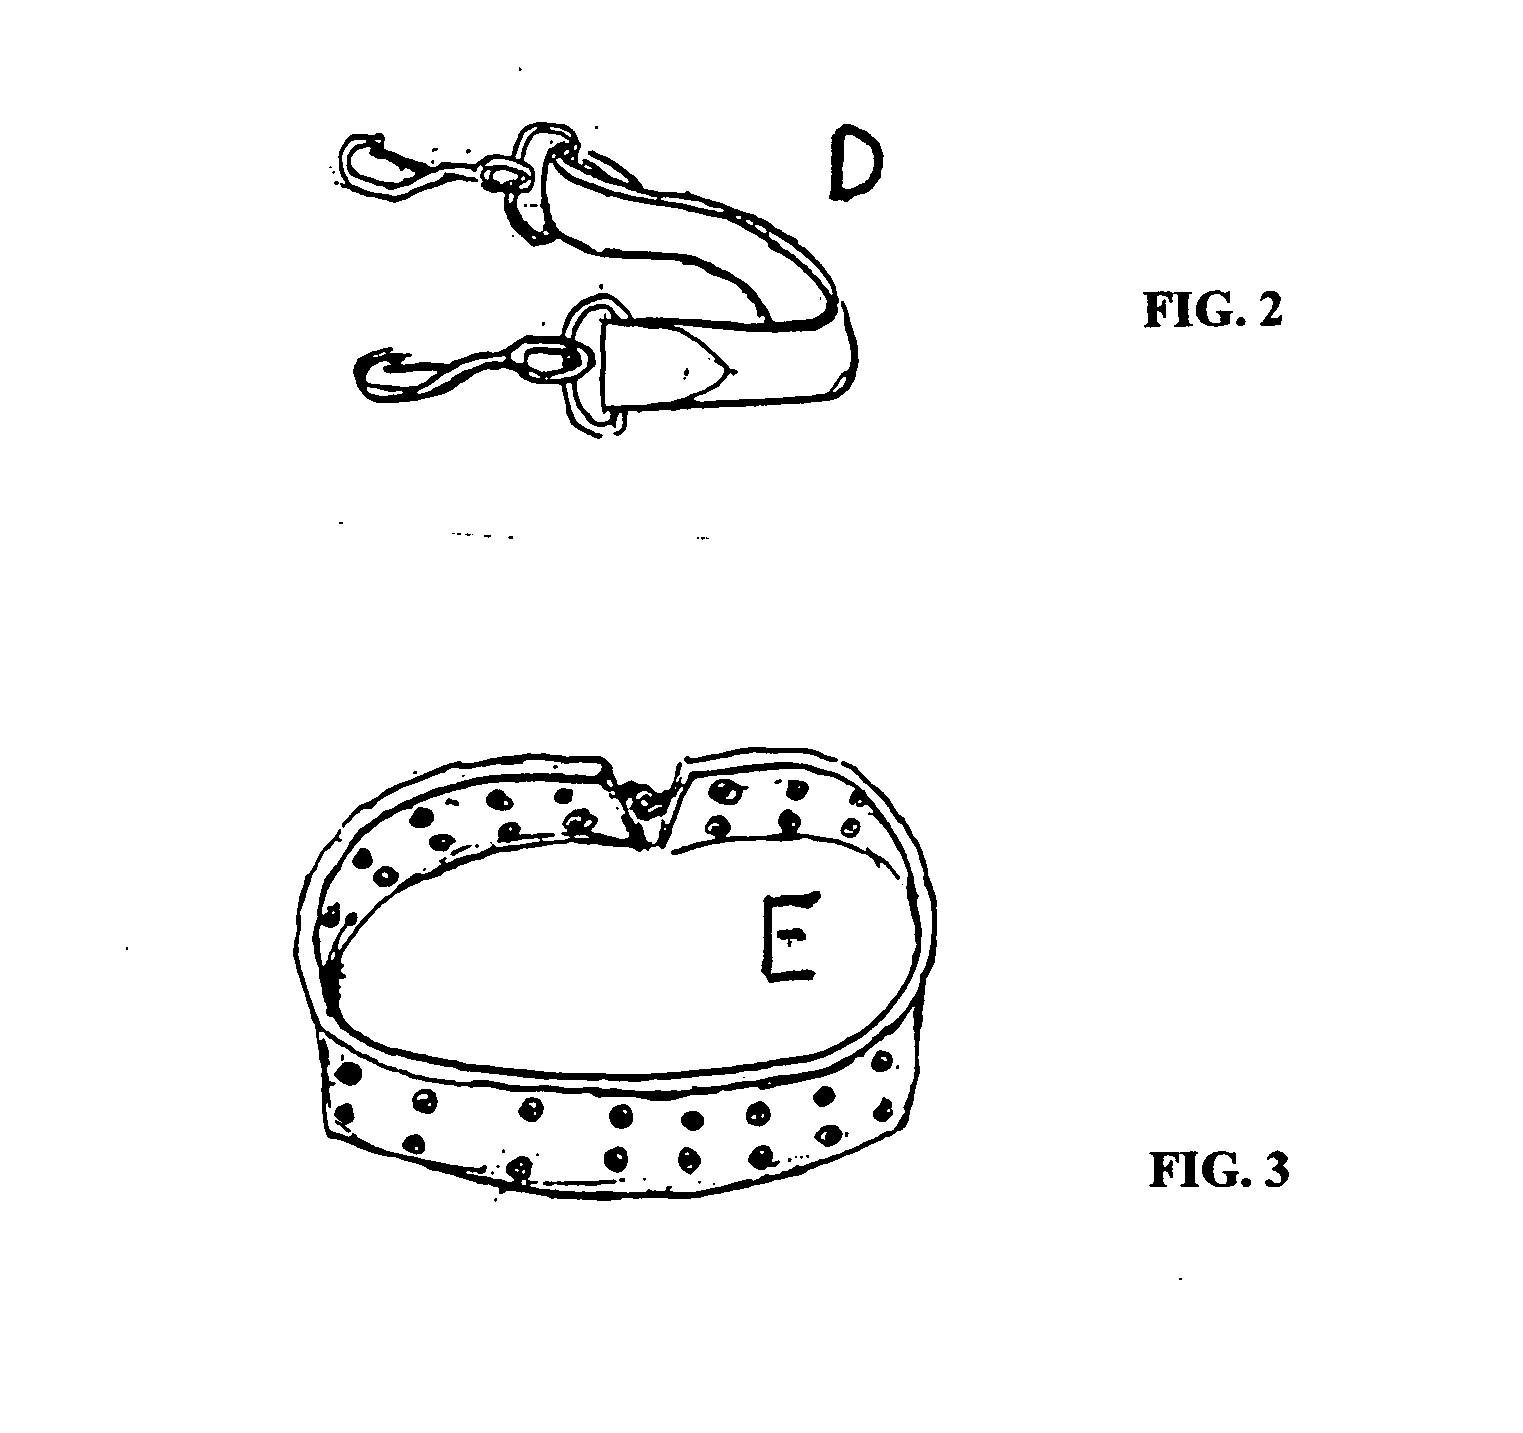 Multi-functional mobile seat platform apparatus for relieving aches or pains while working